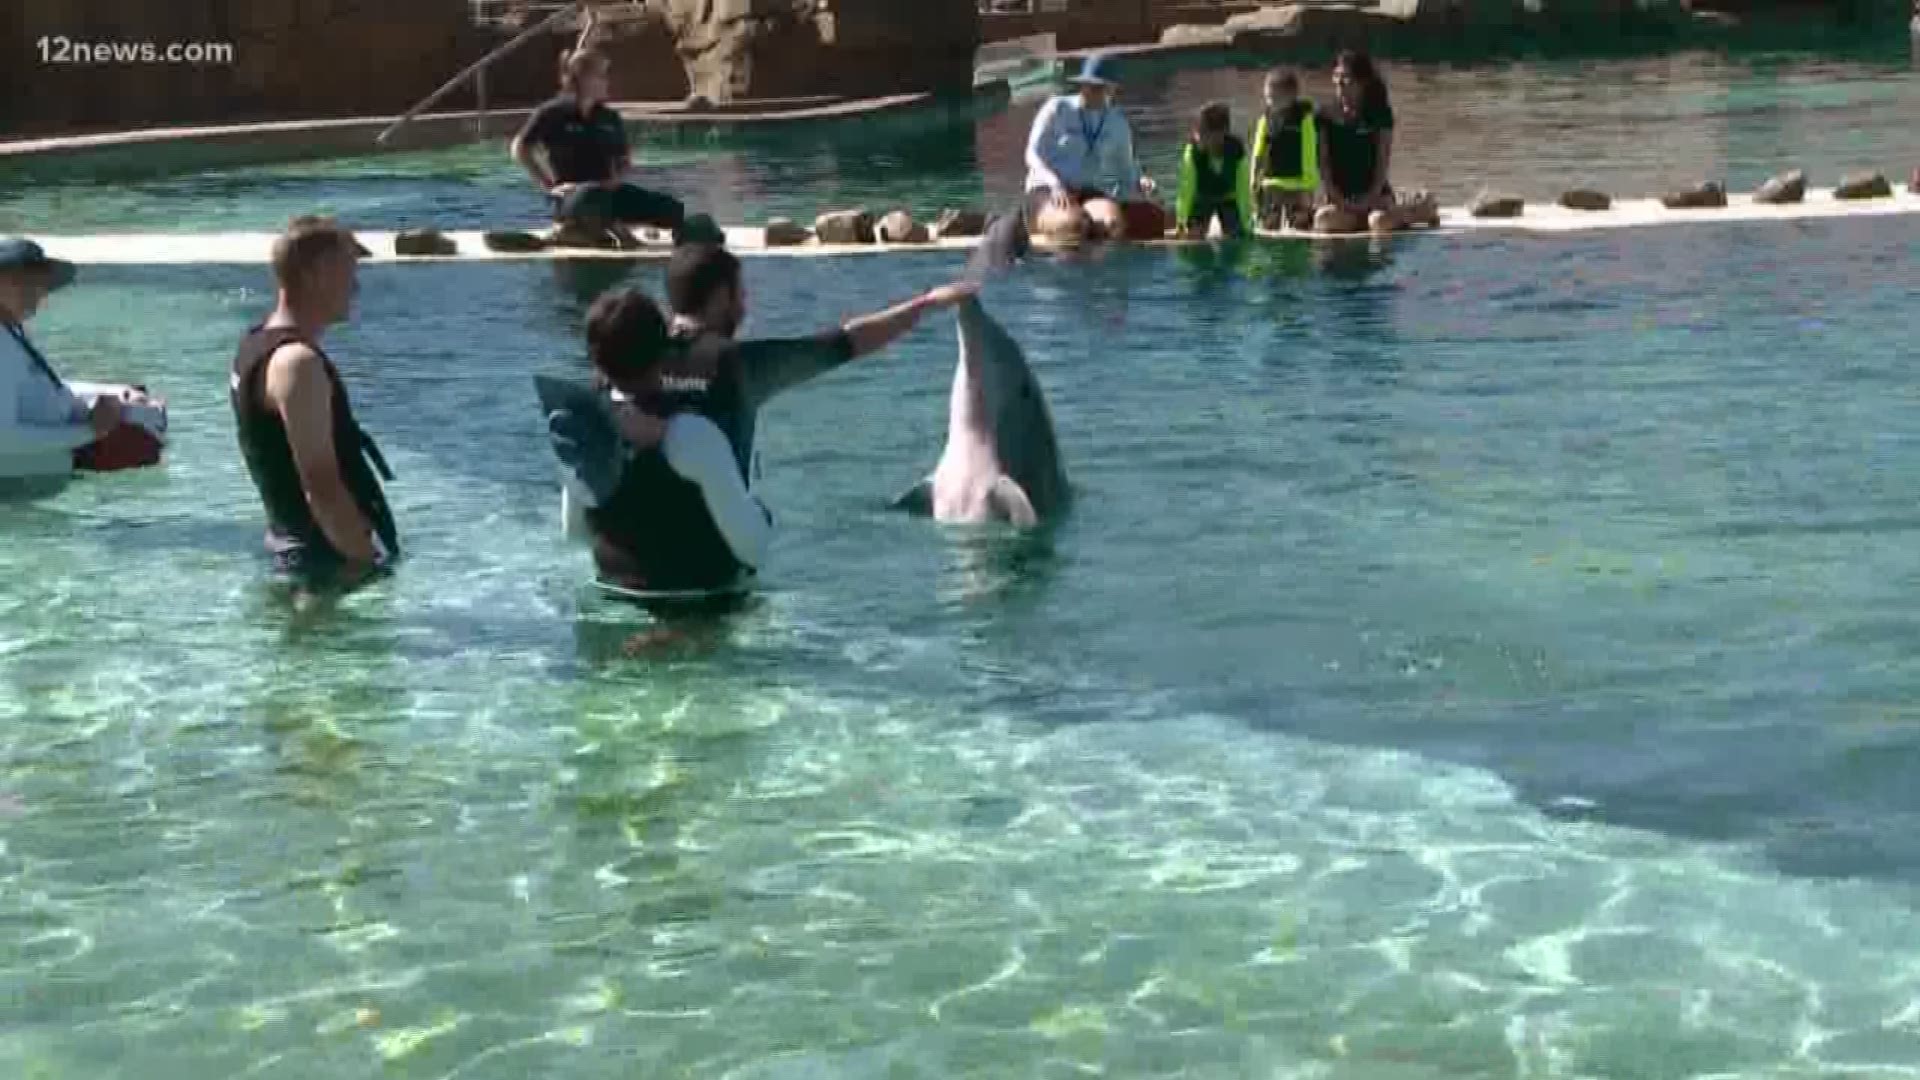 Dolphinaris Arizona said one of its male bottlenose dolphins passed away in September.